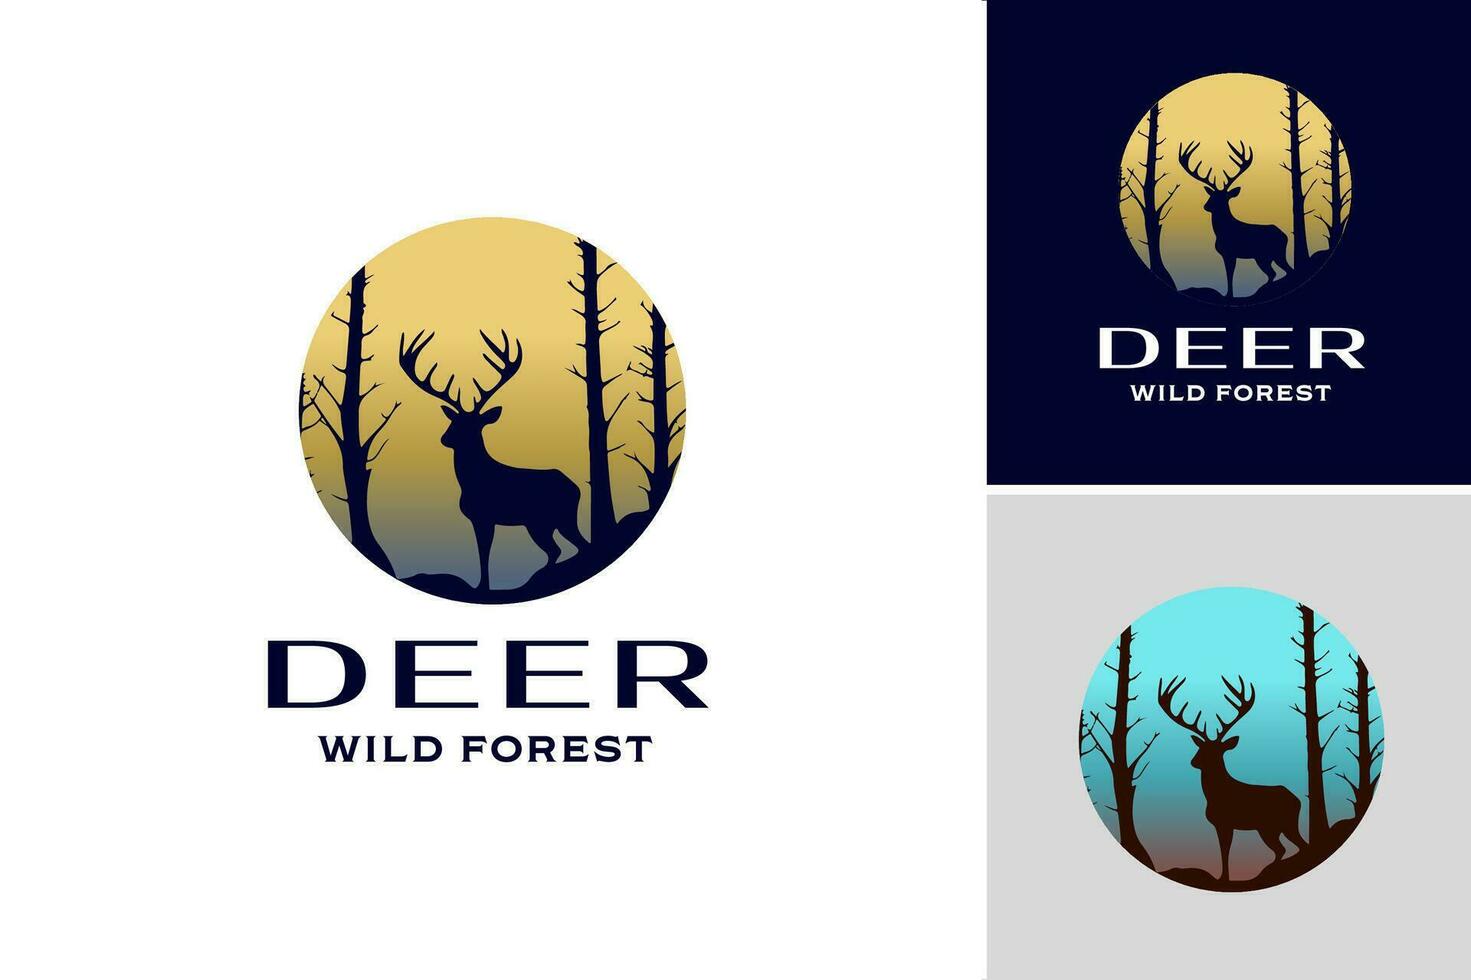 Deer logo design is a suitable asset for businesses, brands, or organizations looking for a visually appealing logo featuring a deer symbol. vector